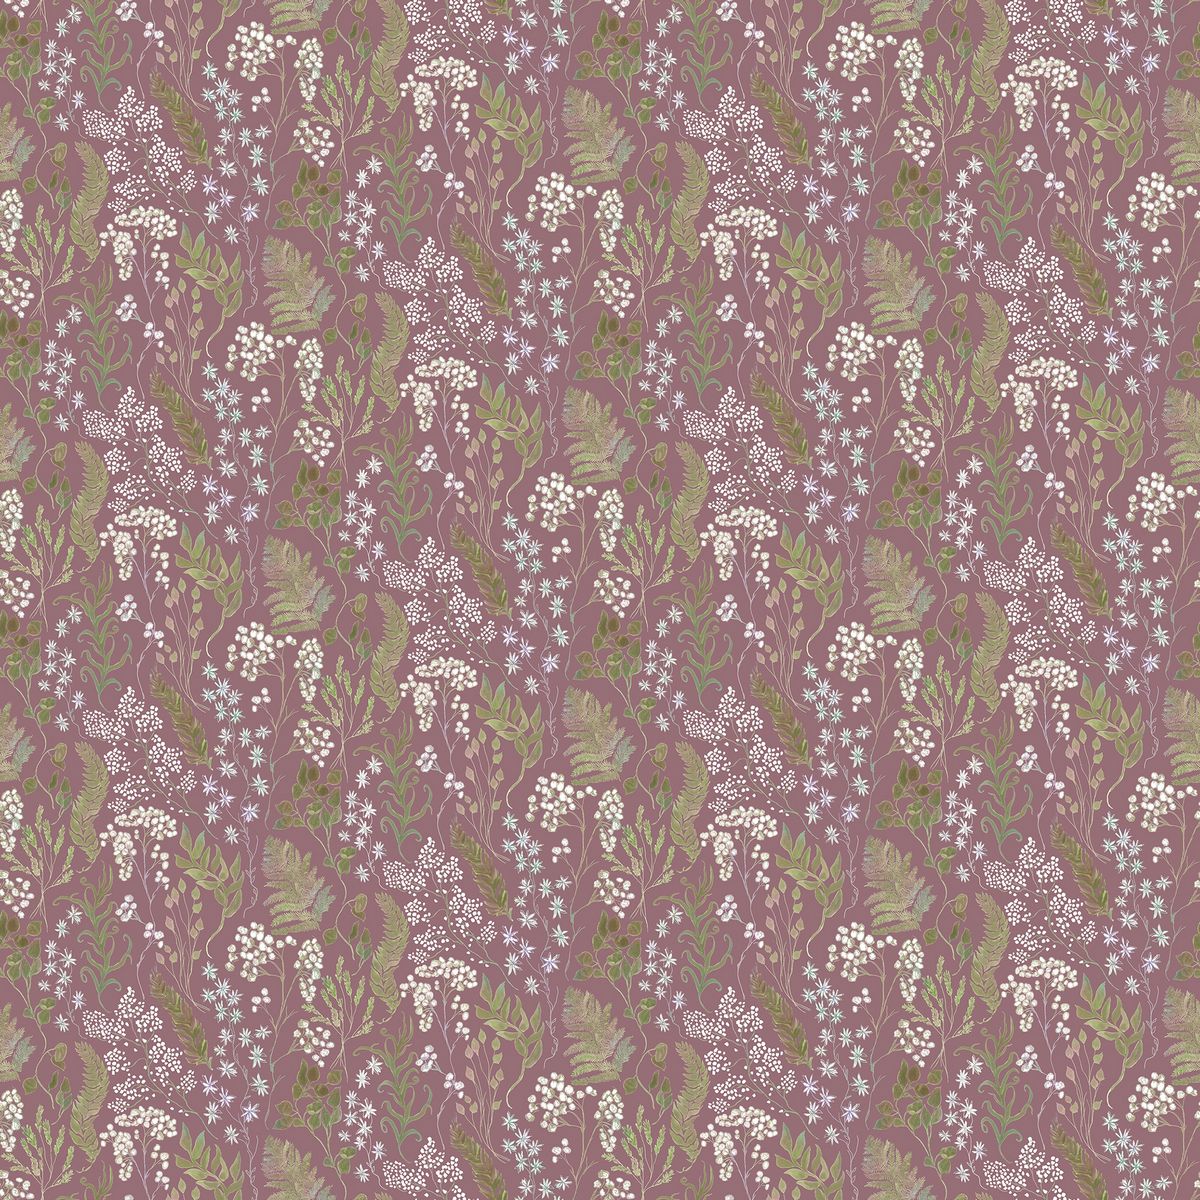 Aileana Heather Fabric by Voyage Maison